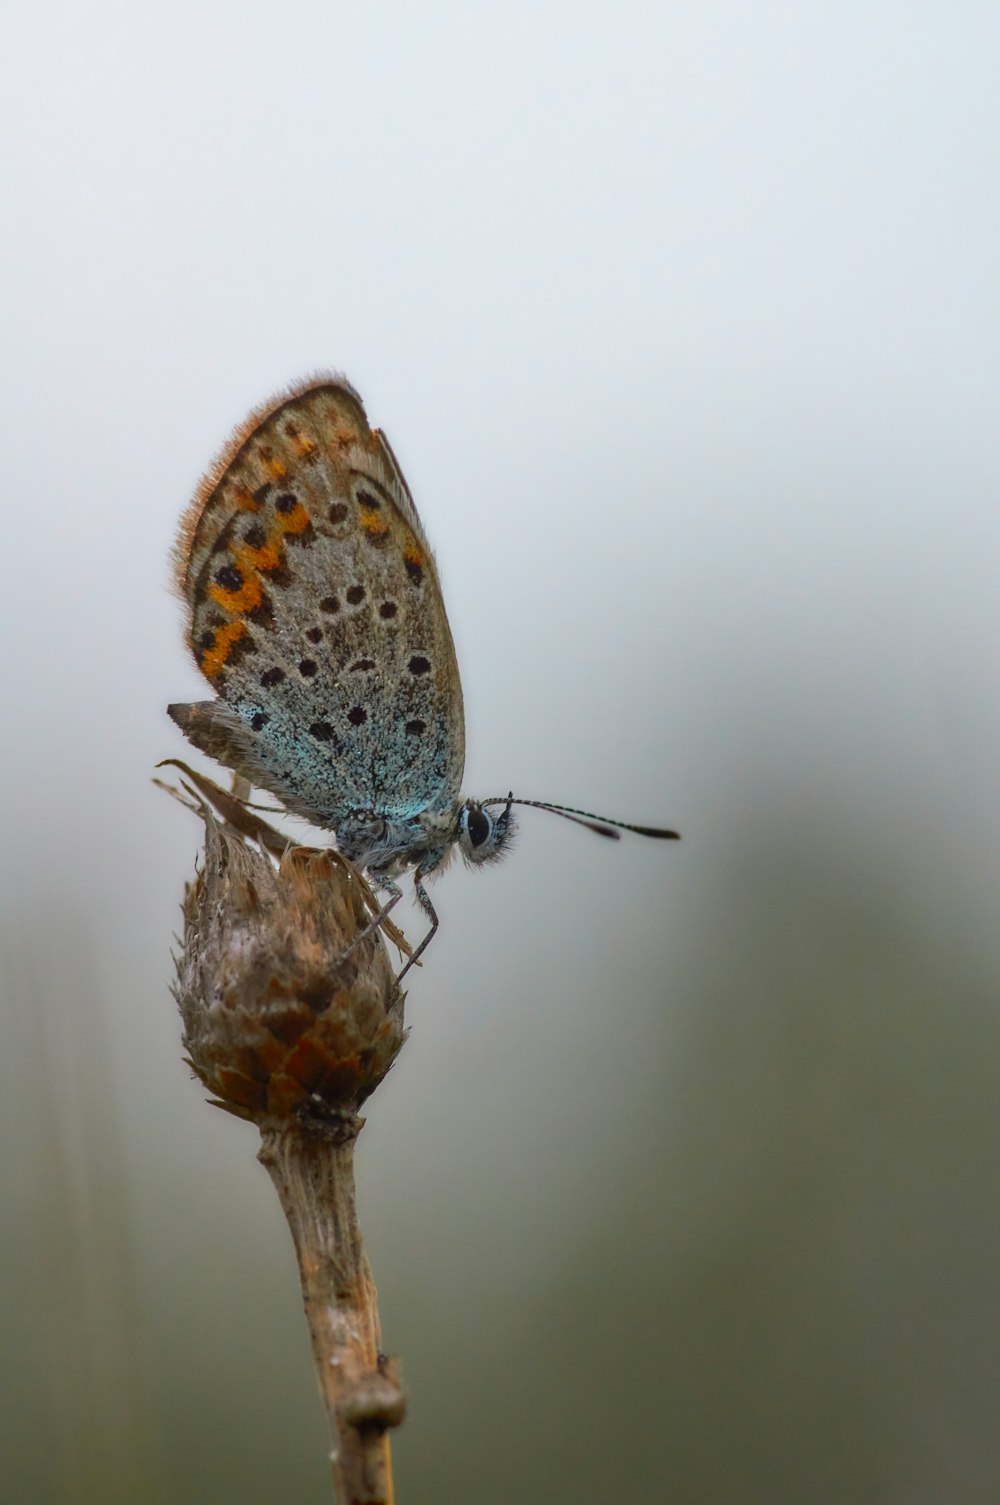 blue and brown butterfly on brown flower bud in close up photography during daytime